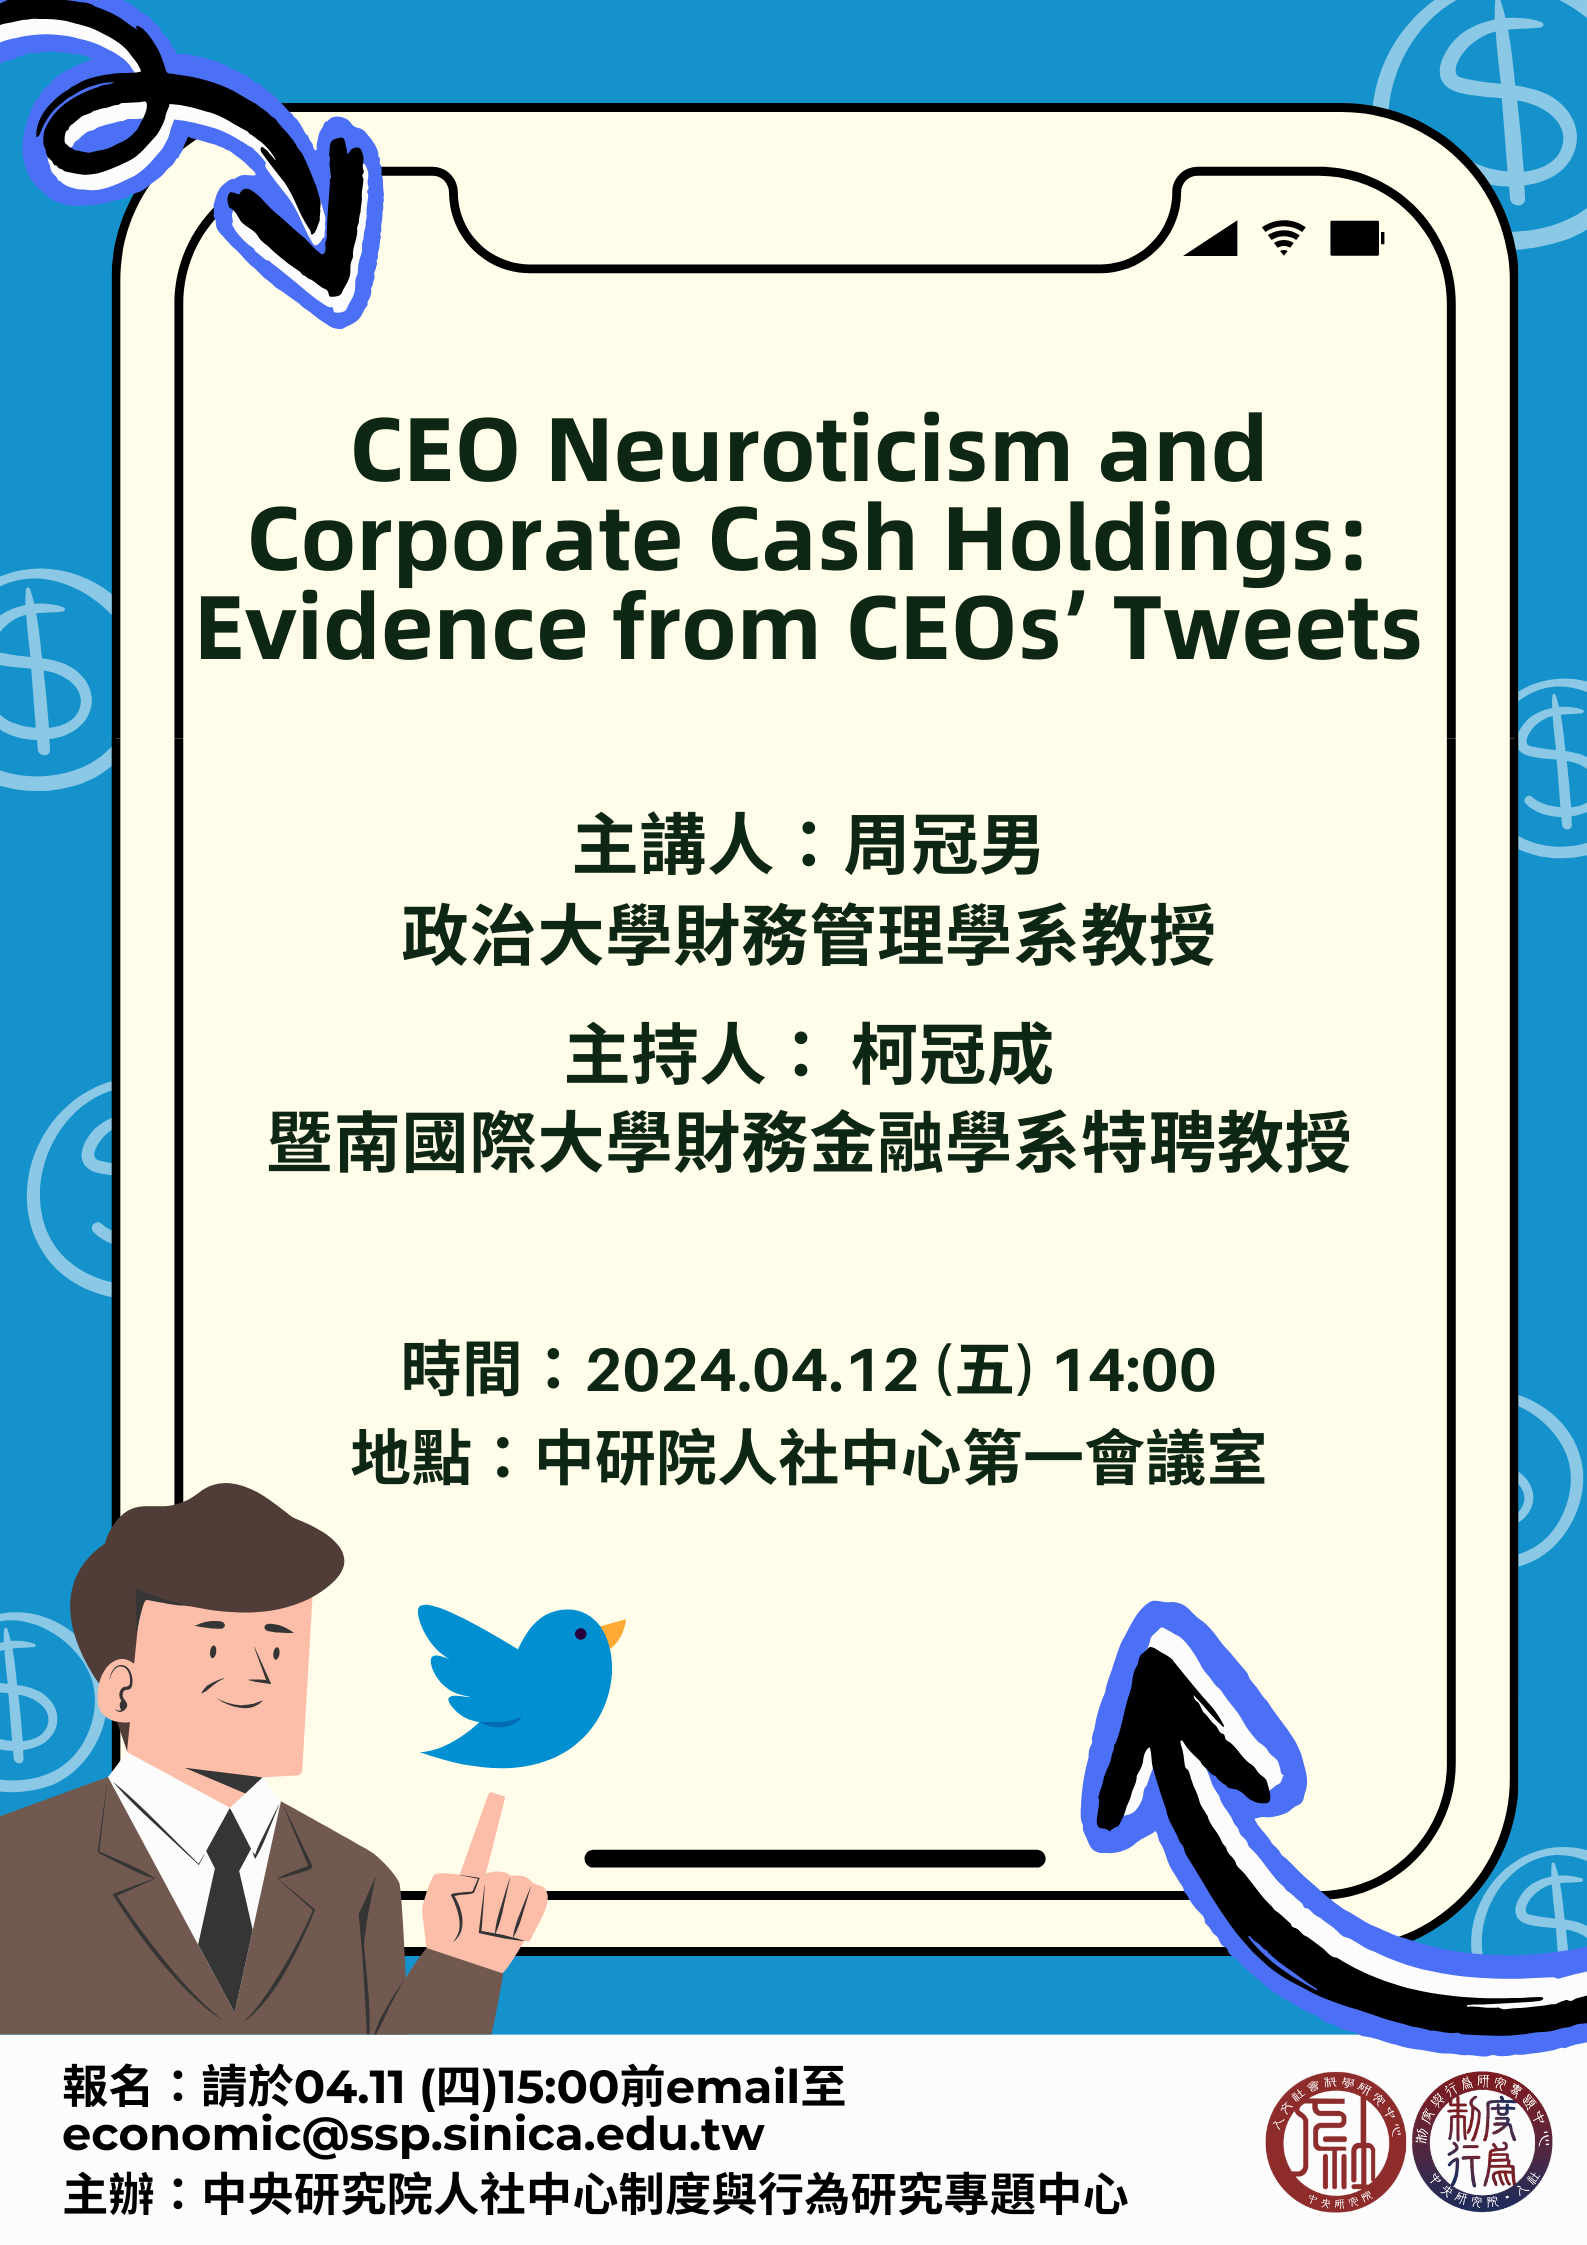 *CEO Neuroticism and Corporate Cash Holdings: Evidence from CEOs’ Tweets